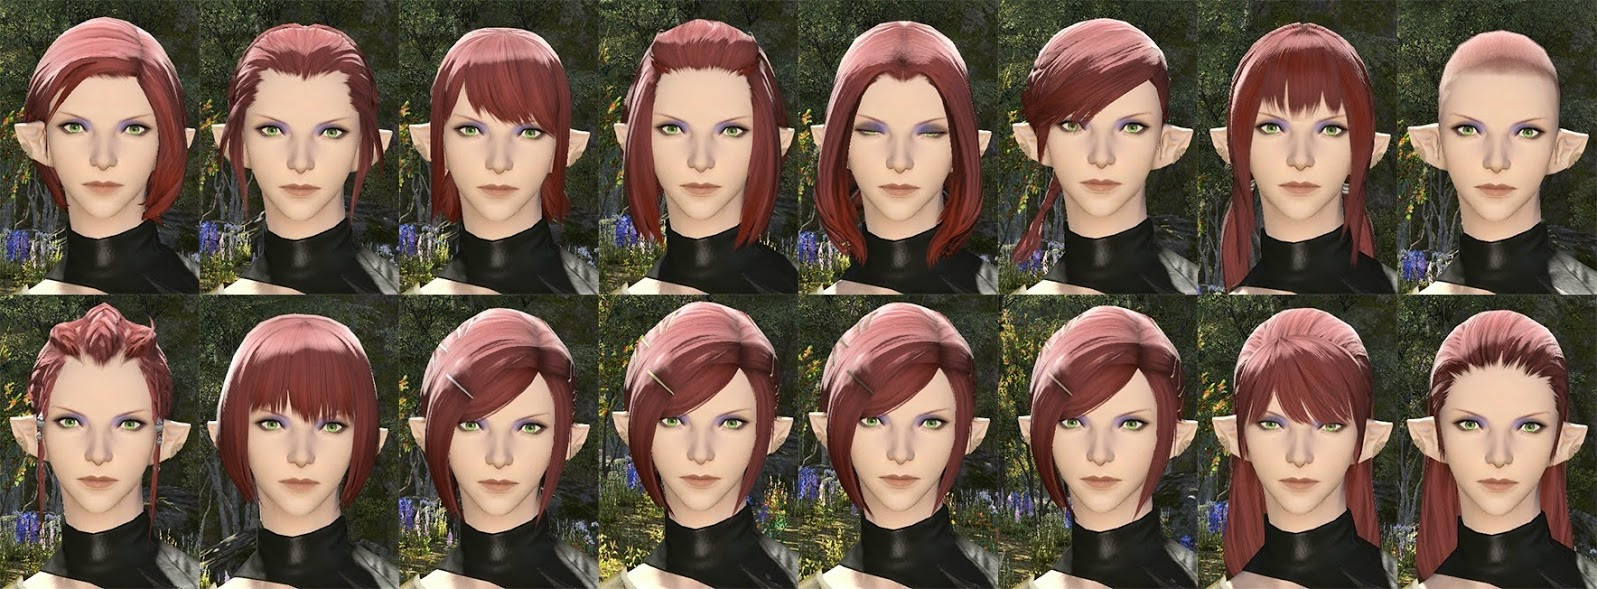 Ffxiv Female Hairstyles
 FFXIV Character Creation